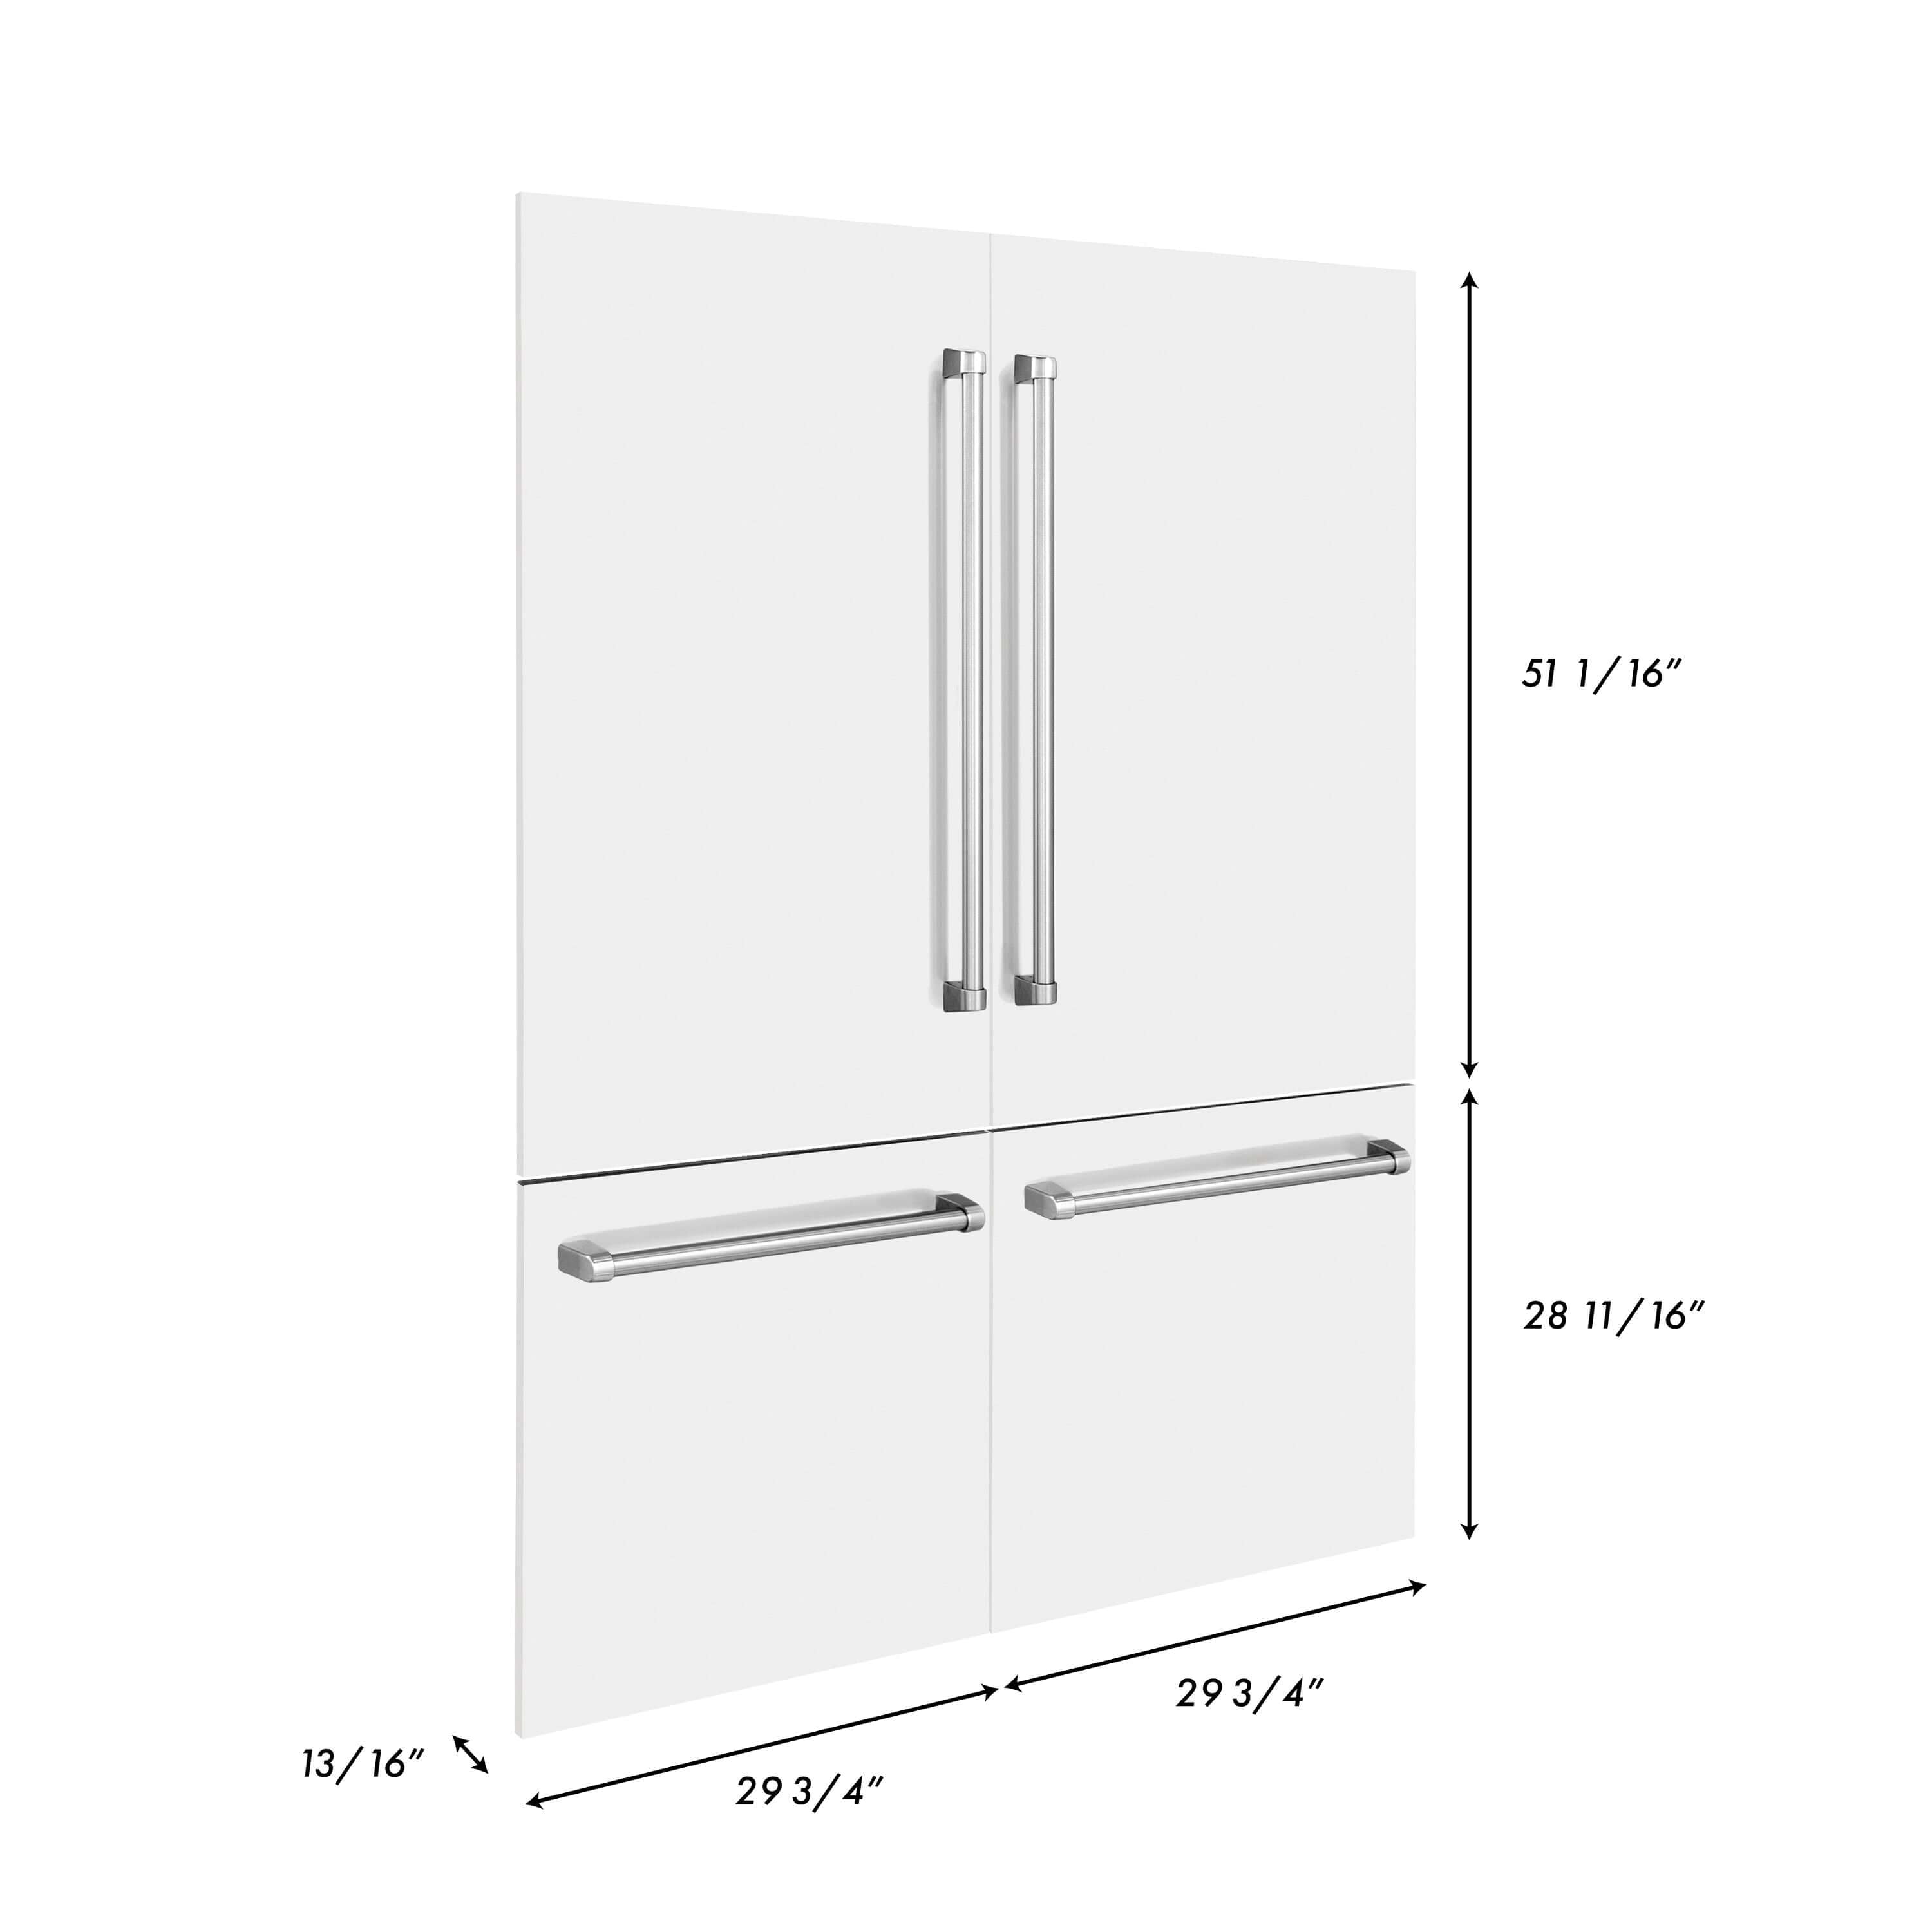 Panels & Handles Only- ZLINE 60 in. Refrigerator Panels in White Matte for a 60 in. Built-in Refrigerator (RPBIV-WM-60) dimensional diagram with measurements.